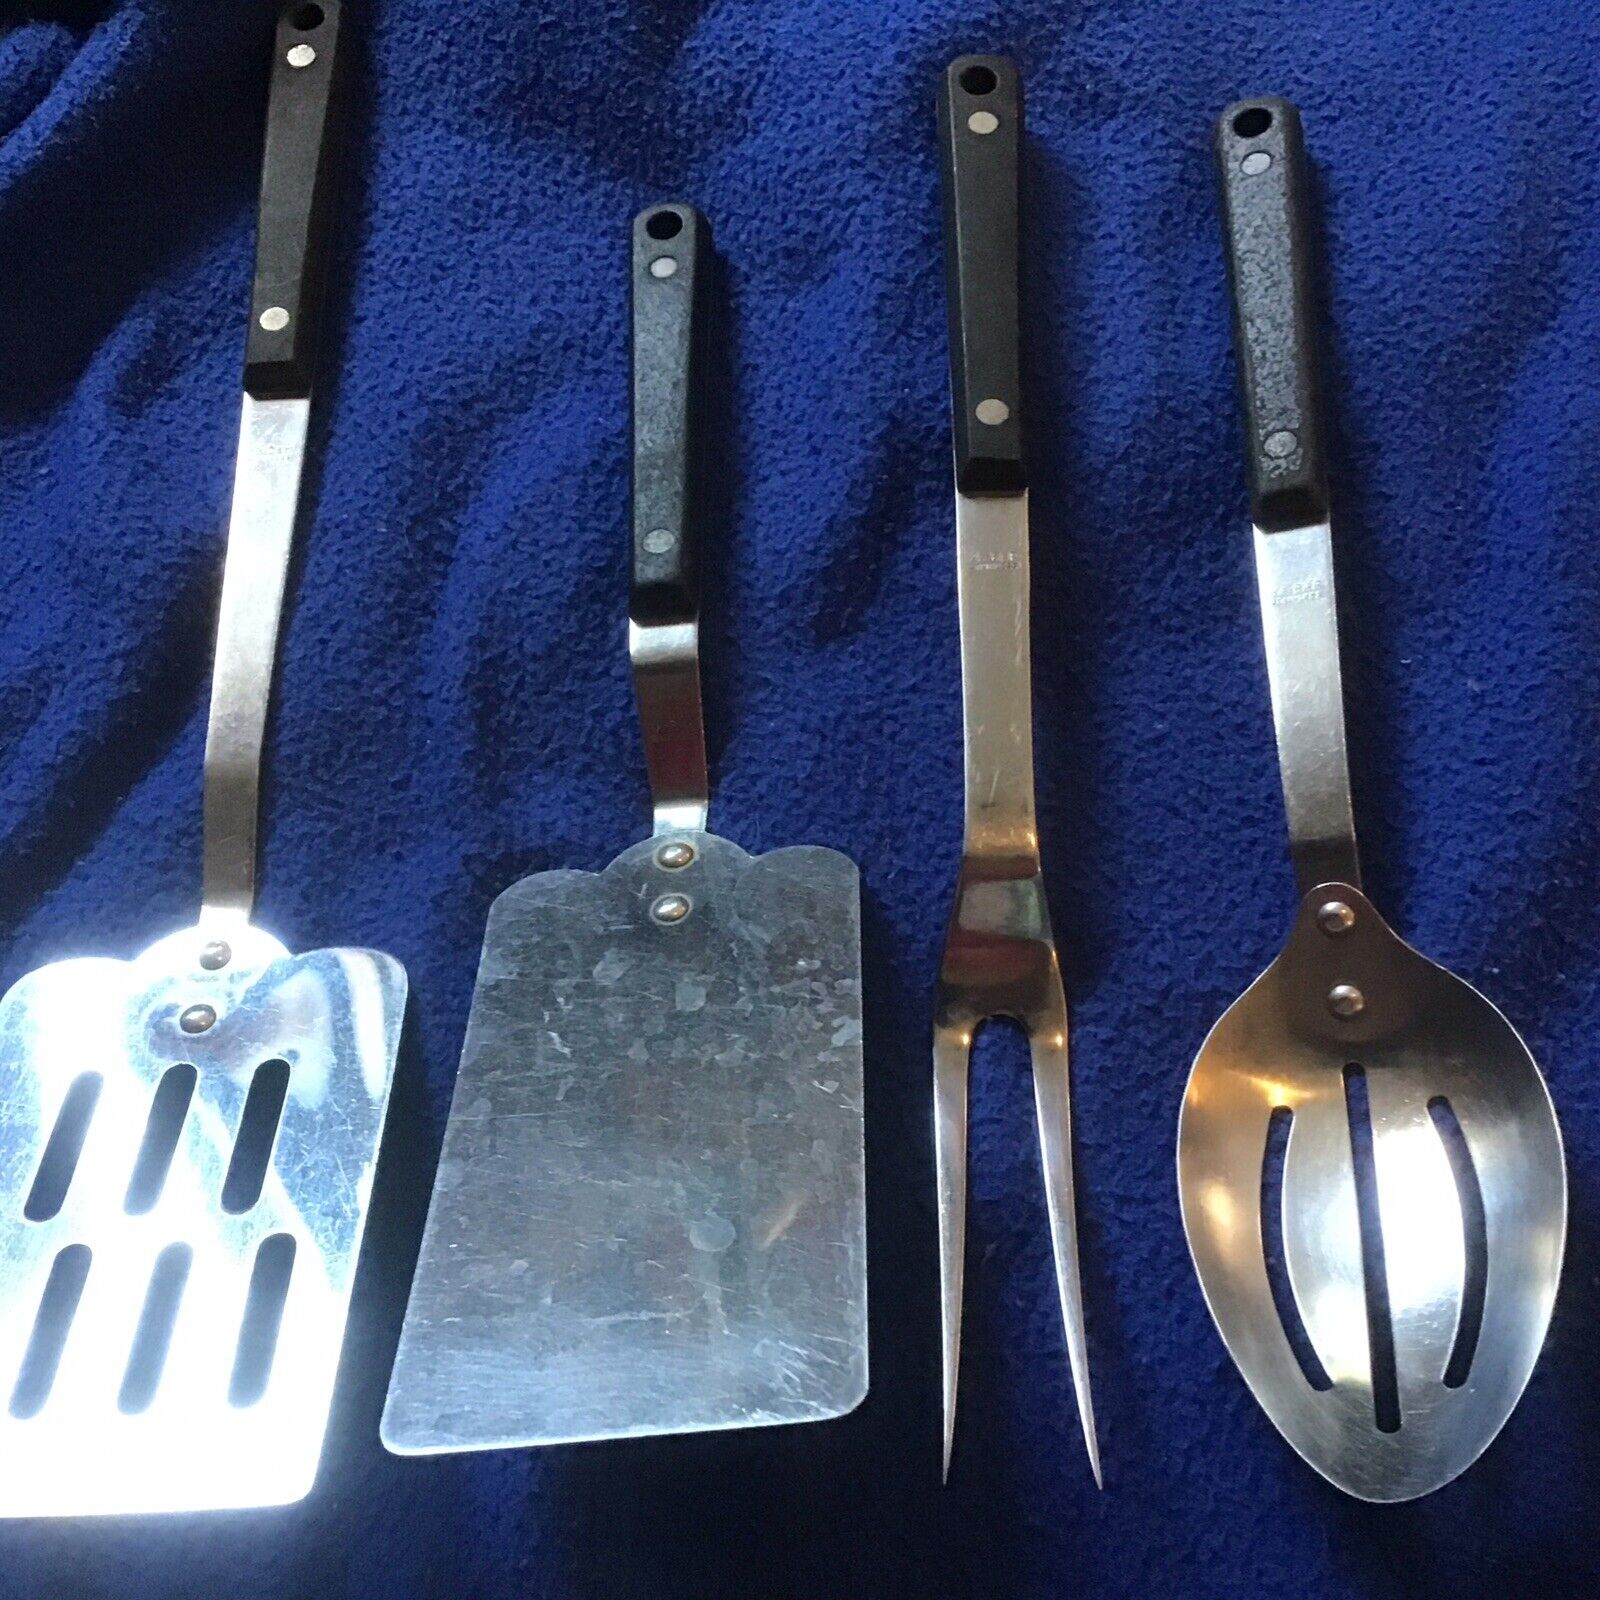 4 Vintage Kabar Stainless Kitchen Utensils Spatula Slotted Spoon Meat Fork